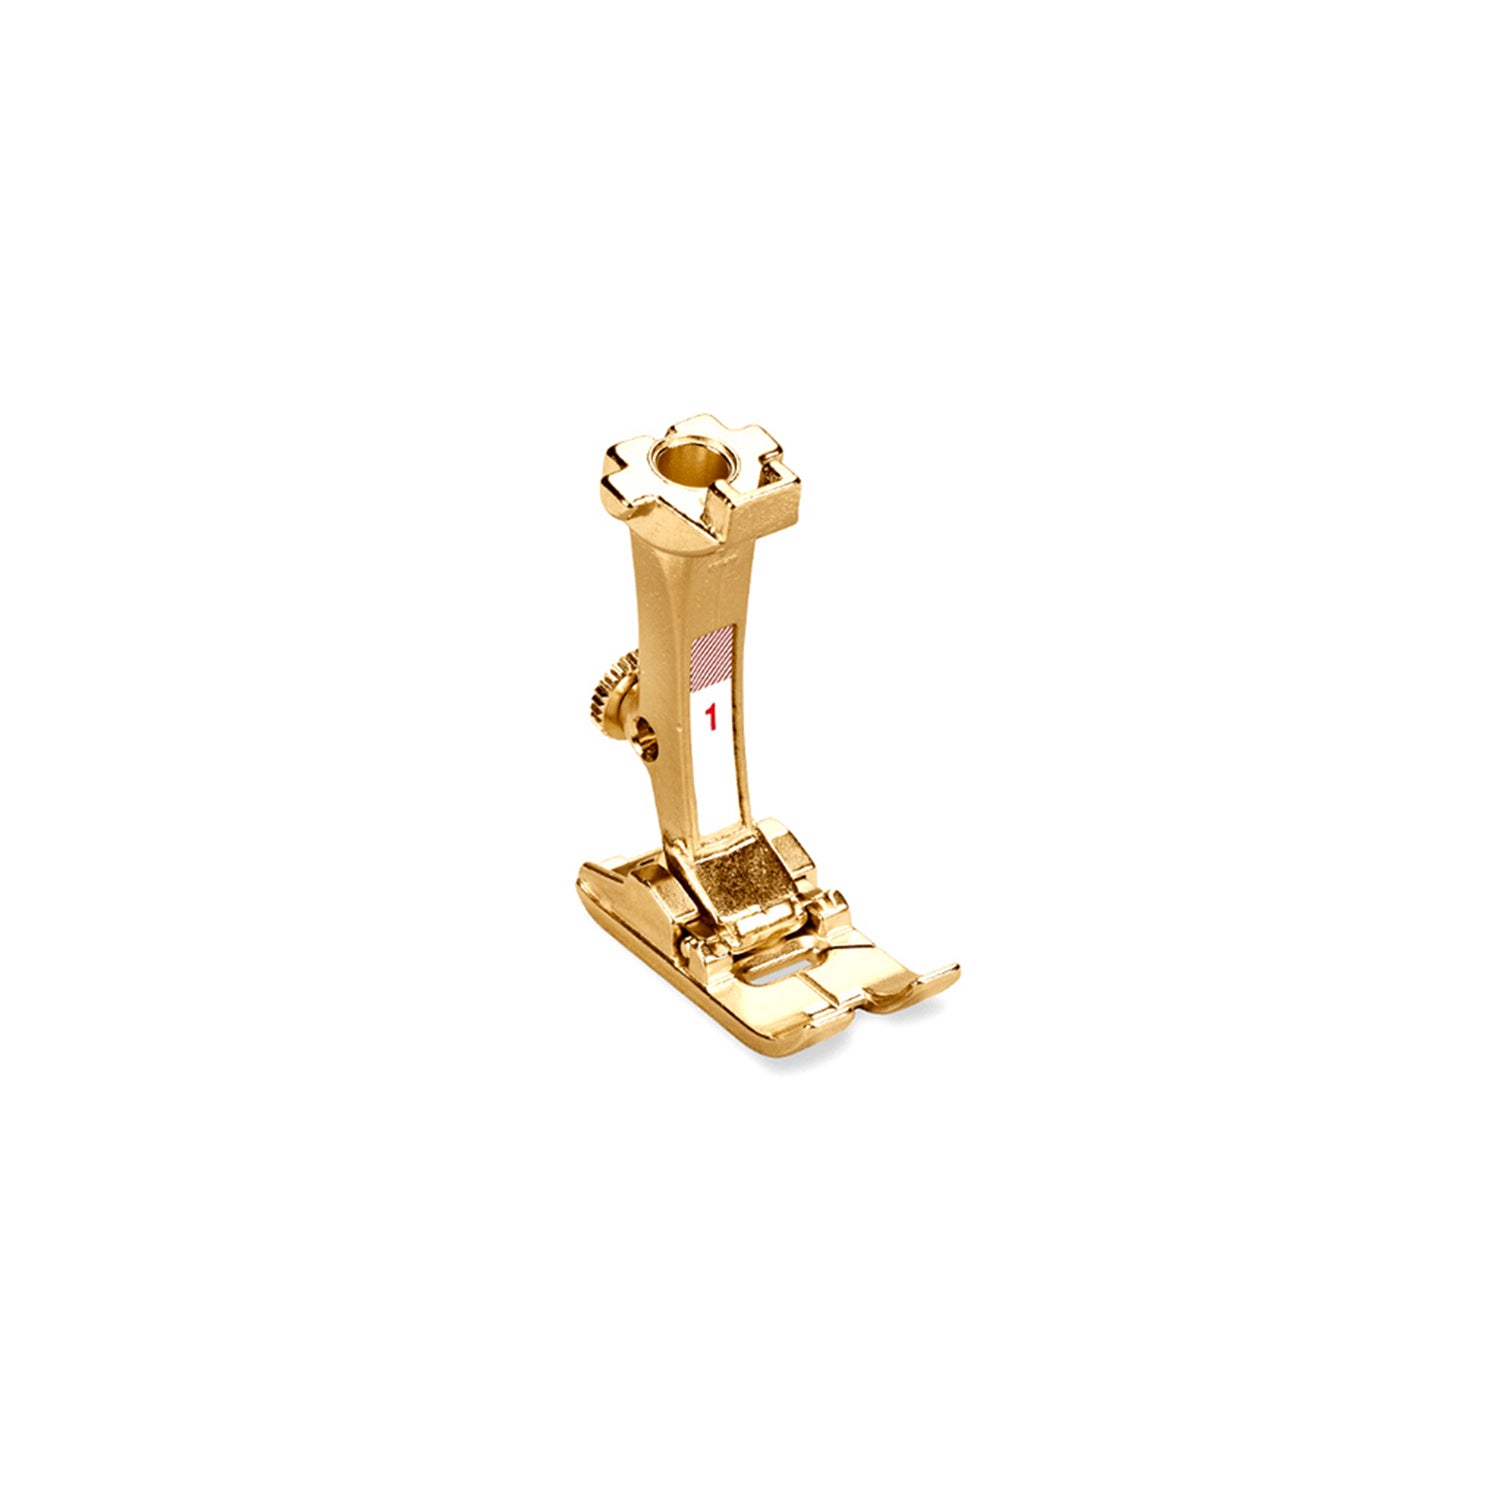 Bernina Gold-Plated Presser Foot #1 (Limited Anniversary Edition)